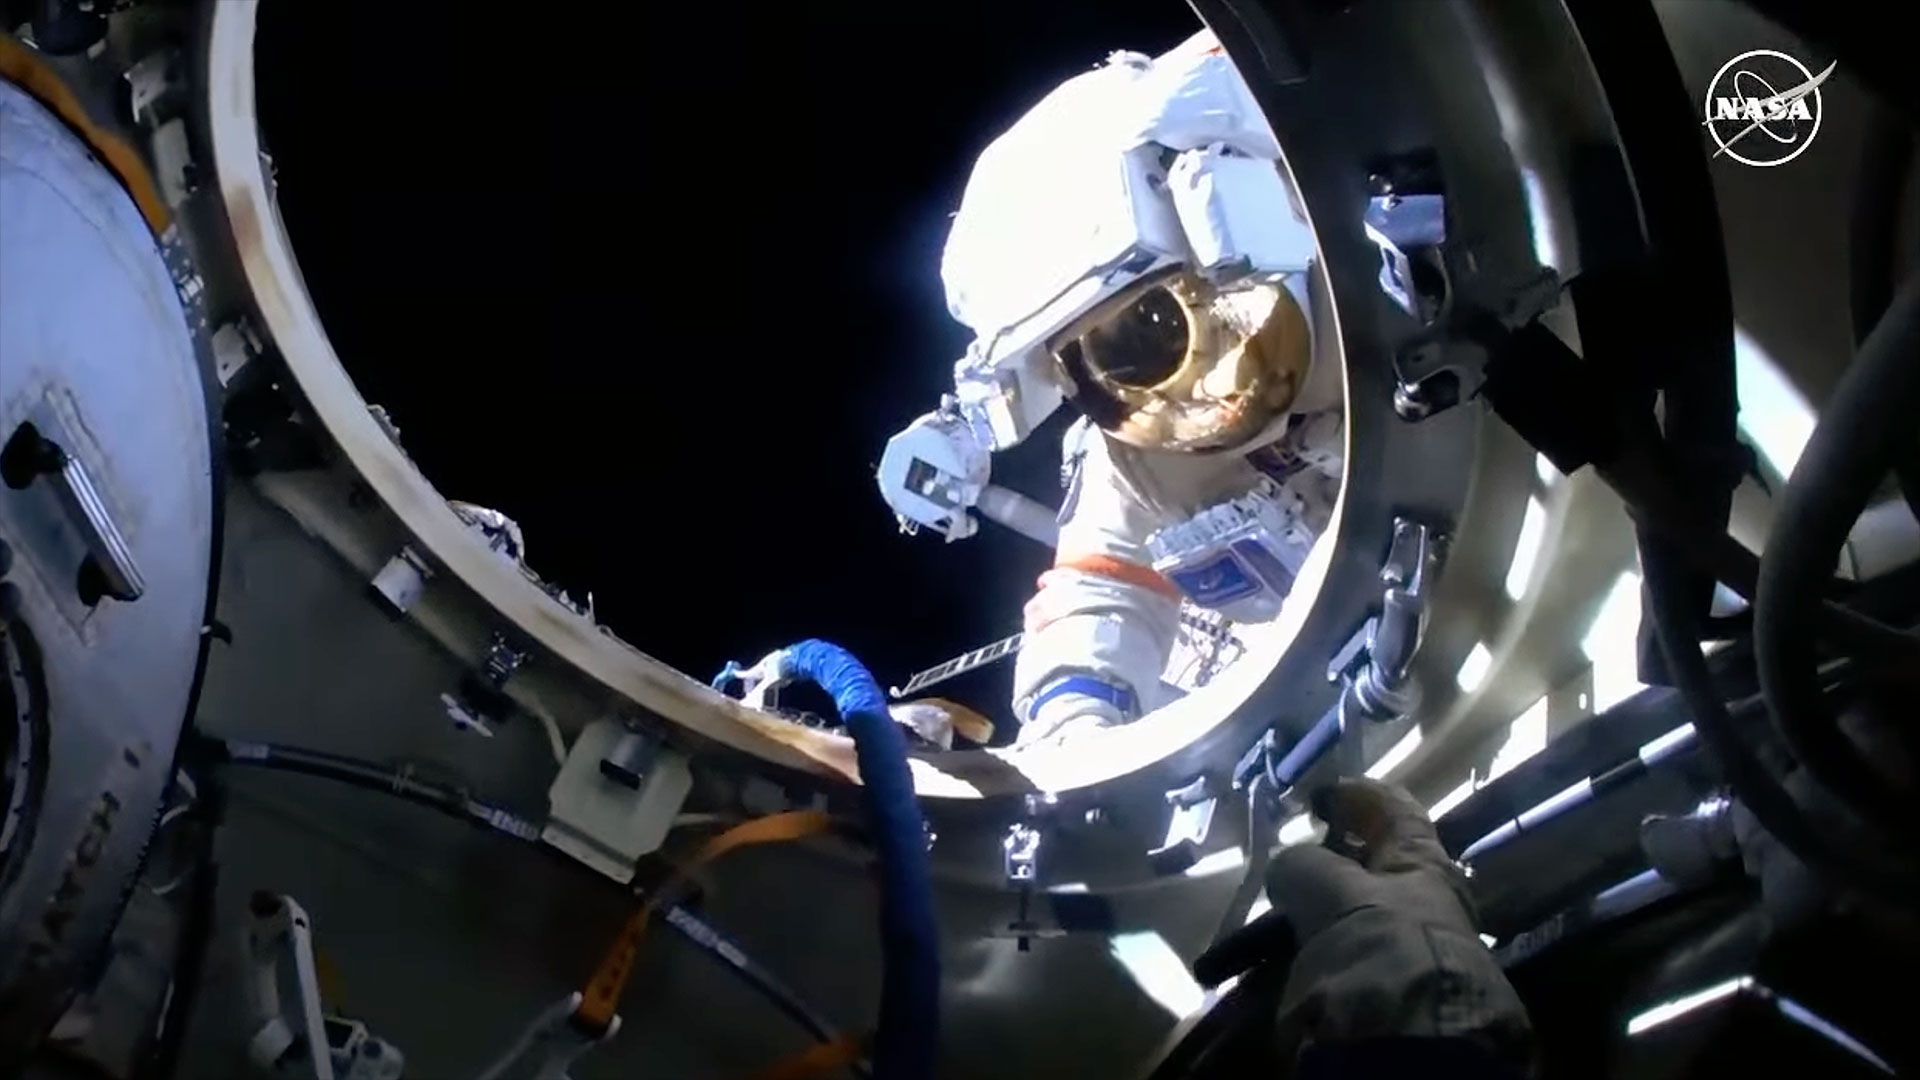 a cosmonaut in a white spacesuit during a spacewalk, as seen through a metallic circular part of the international space station